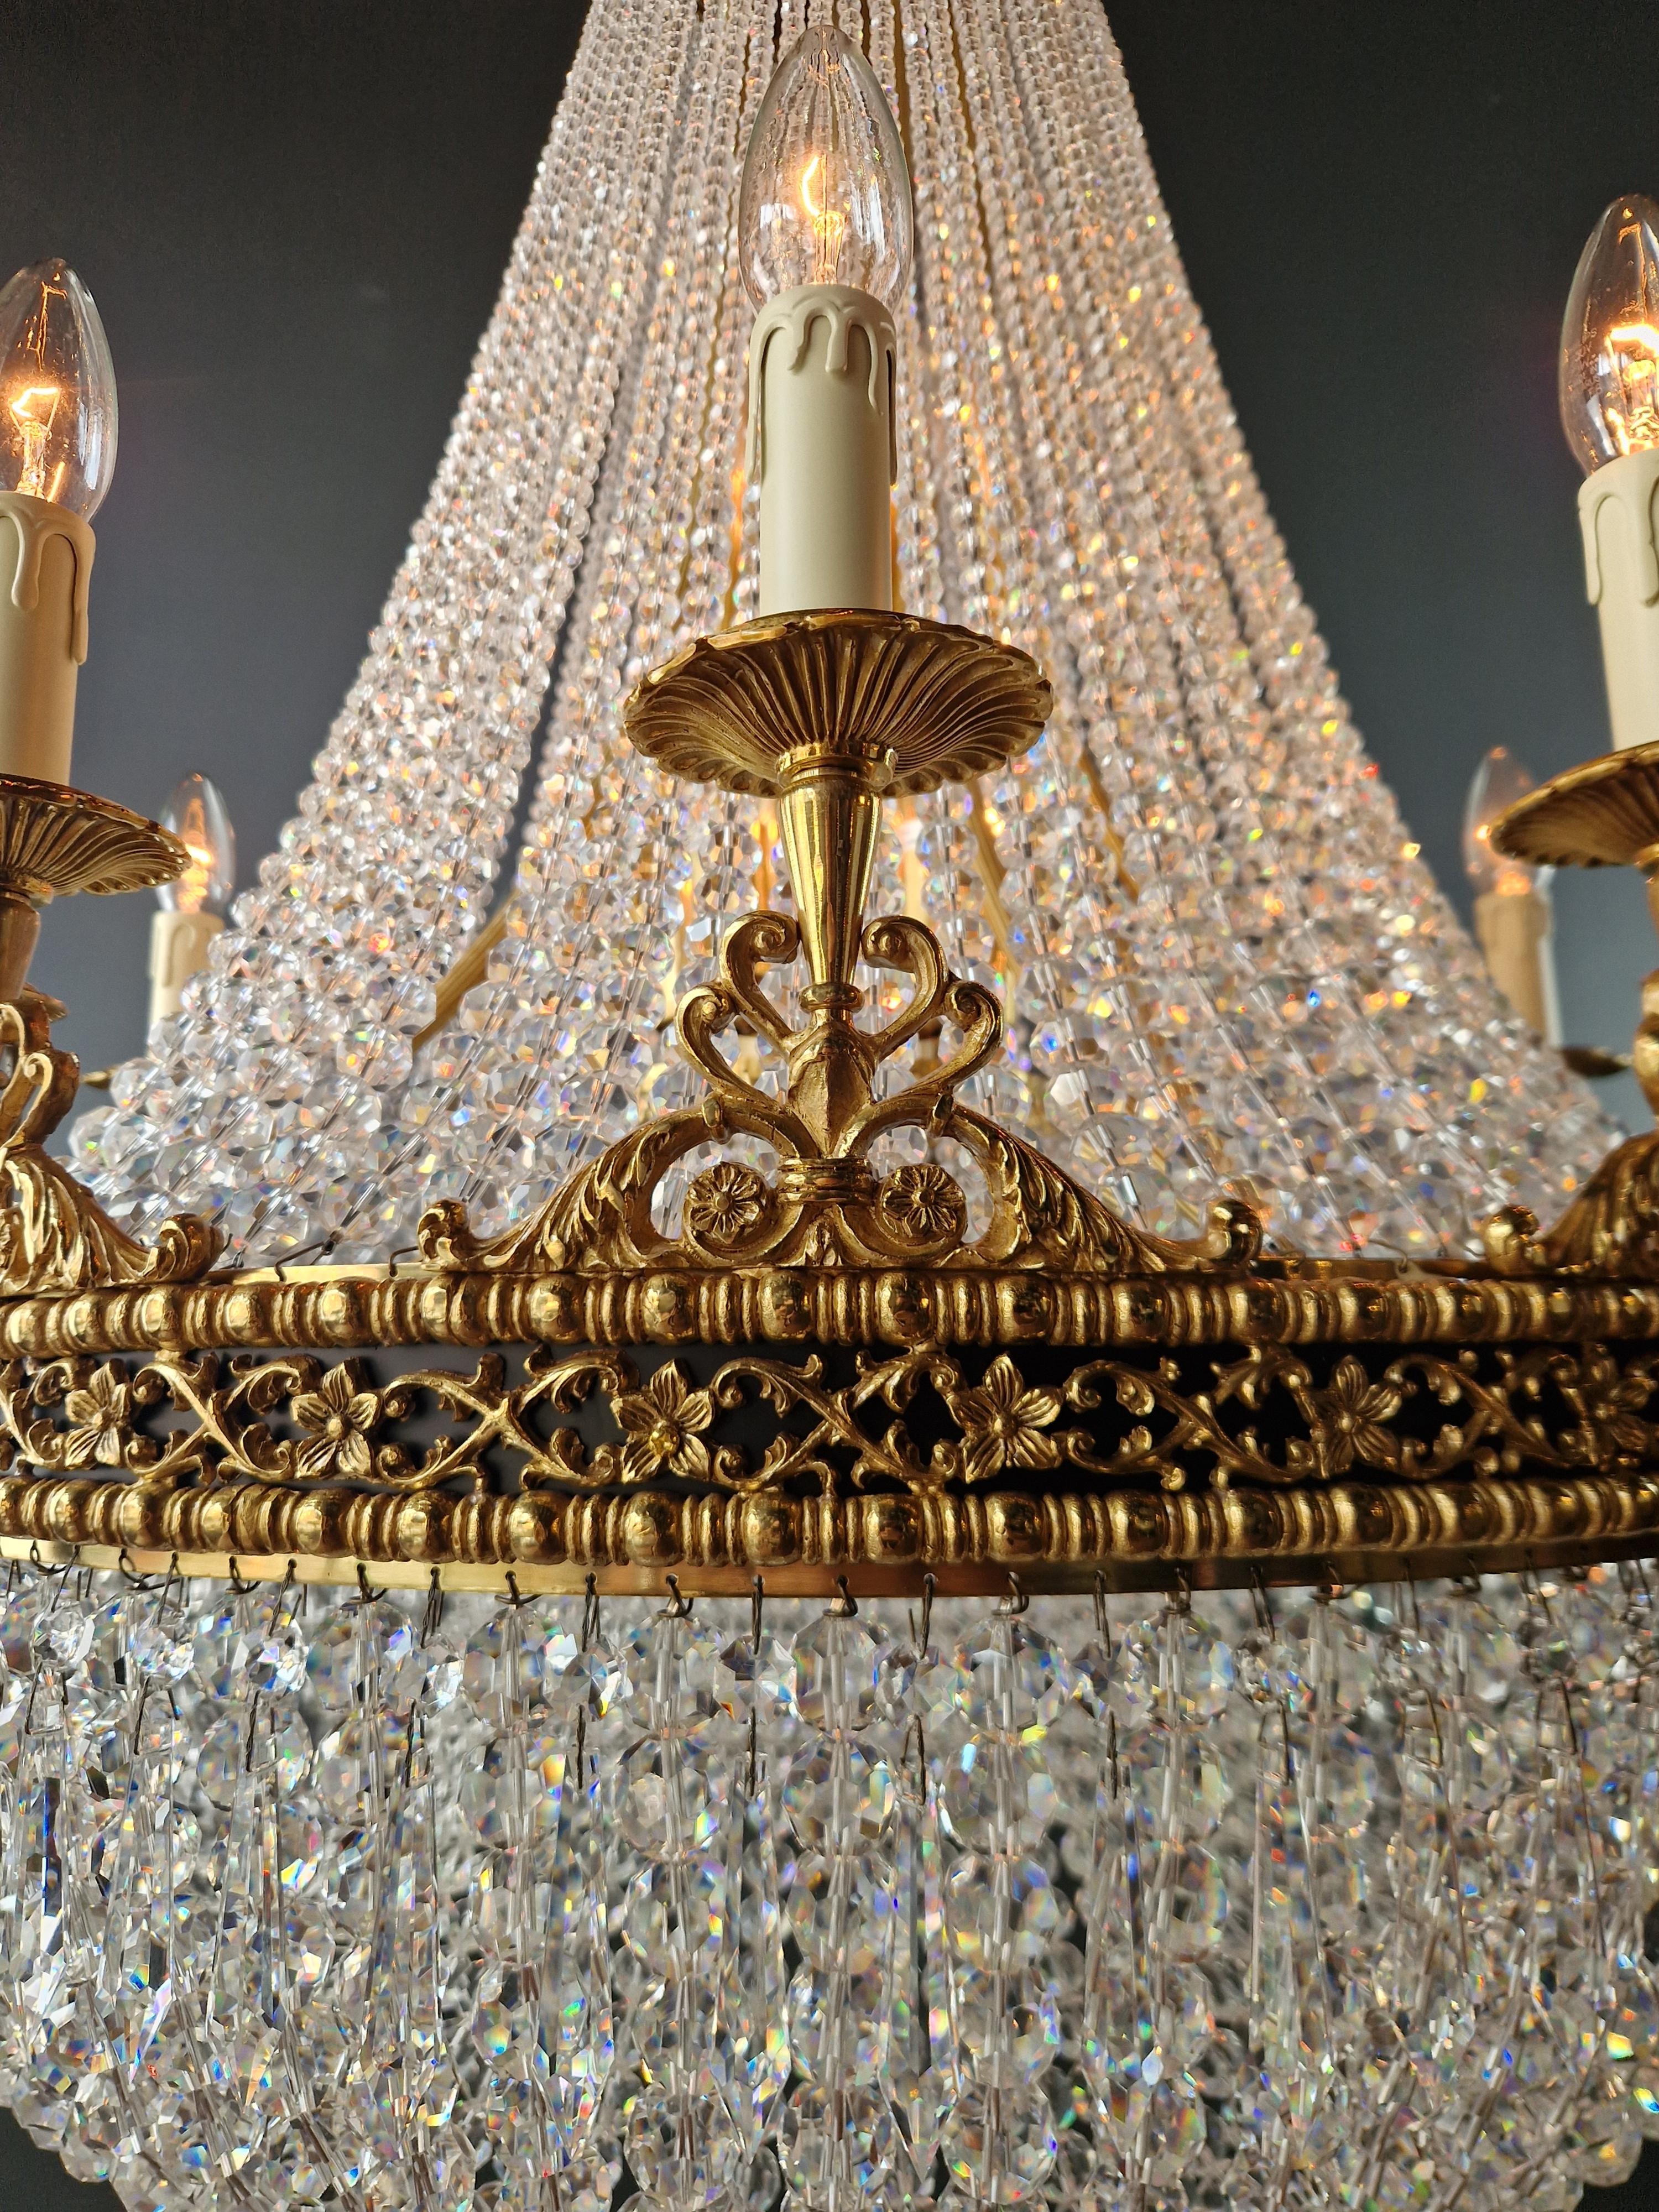 Contemporary Brass Basket Empire Sac a Pearl Chandelier Beaded Crystal Lustre Lamp Antique For Sale